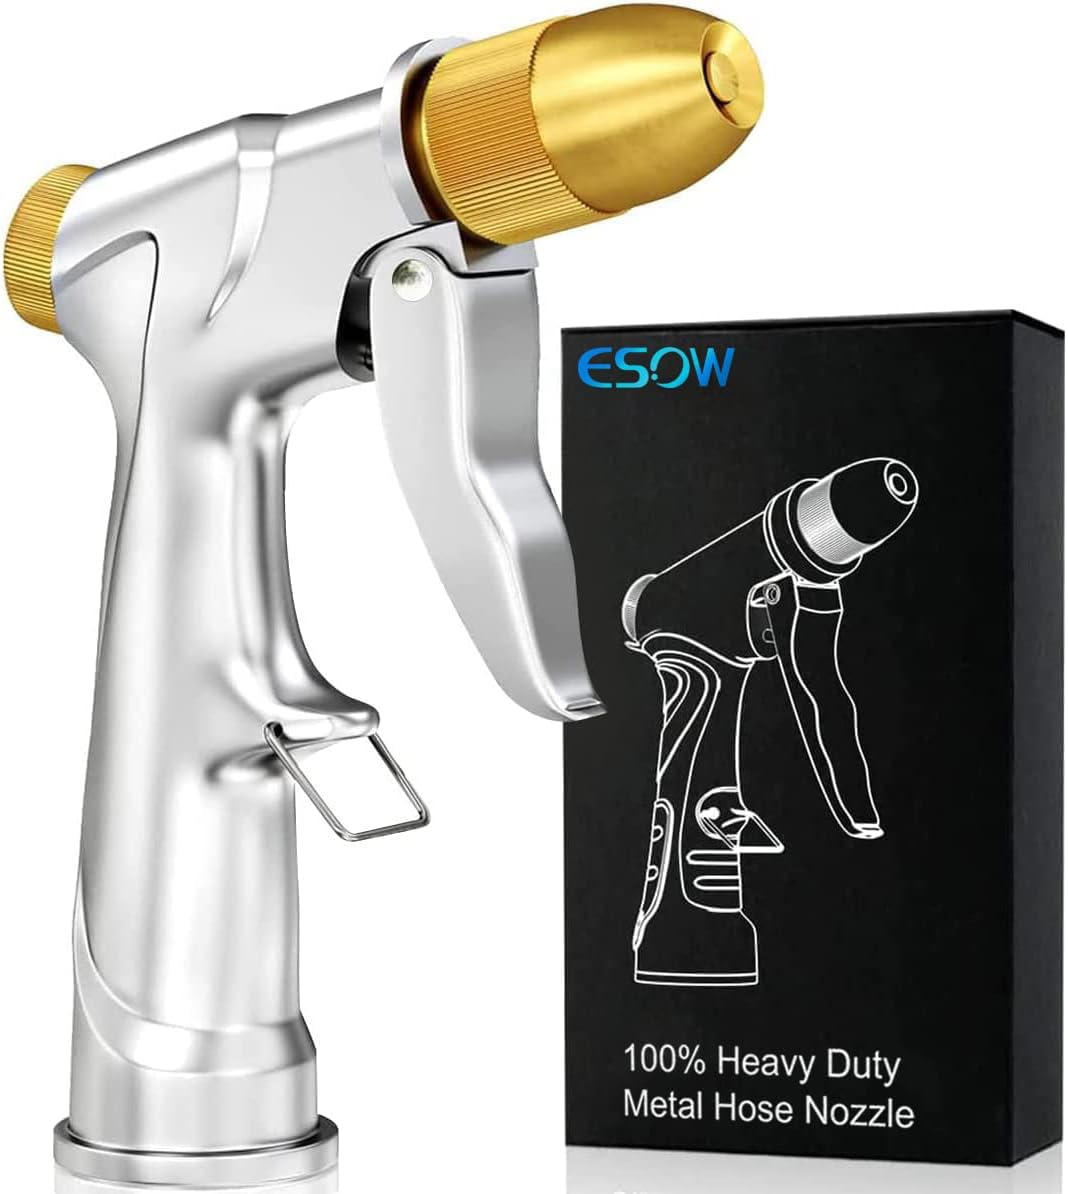 ESOW Garden Hose Nozzle, 100% Heavy Duty Metal Spray Gun with Full Brass Nozzle, 4 Watering Patterns Watering Nozzle- High Pressure Pistol Grip Sprayer for Watering Plants, Car Wash and Showering Dog